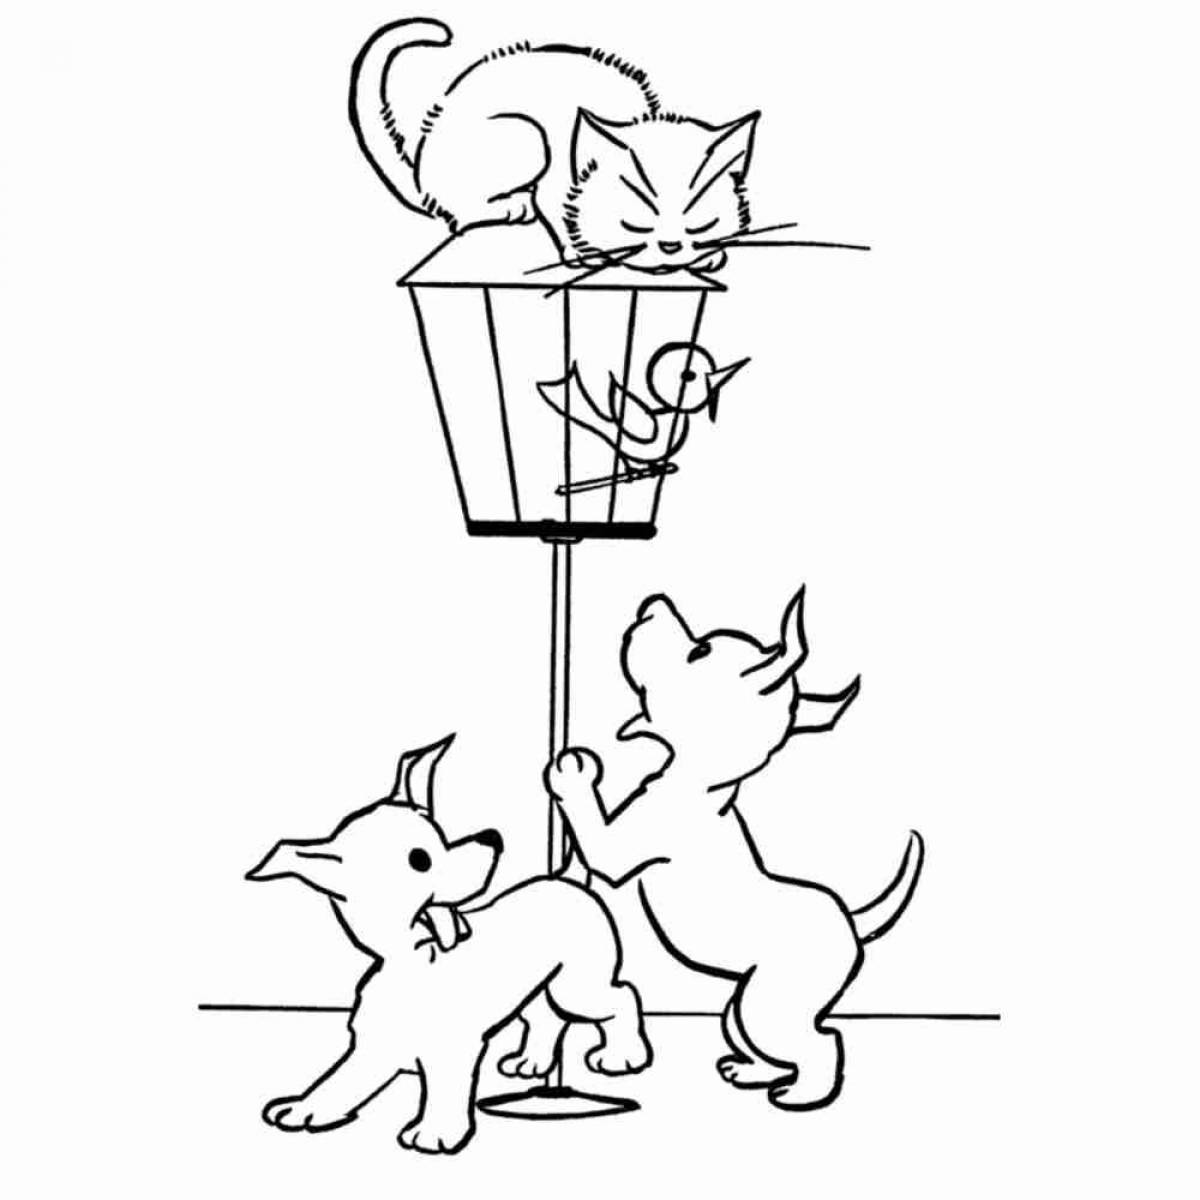 Loving dog and cat coloring page